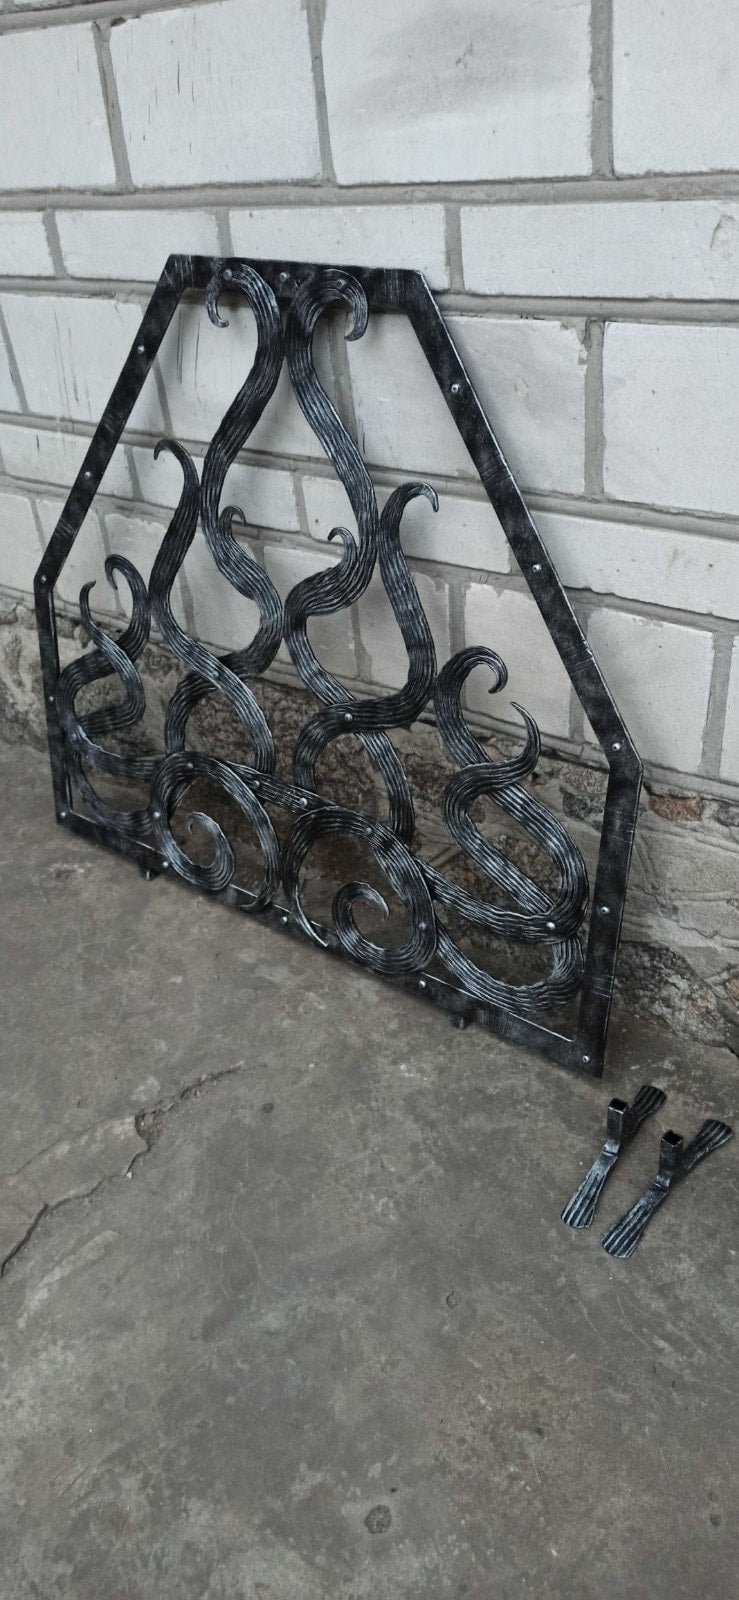 Fireplace screen, fireplace, firewood holder, fire poker, Christmas, anniversary, blacksmith, Fathers Day, reparation, ForgedCommodities